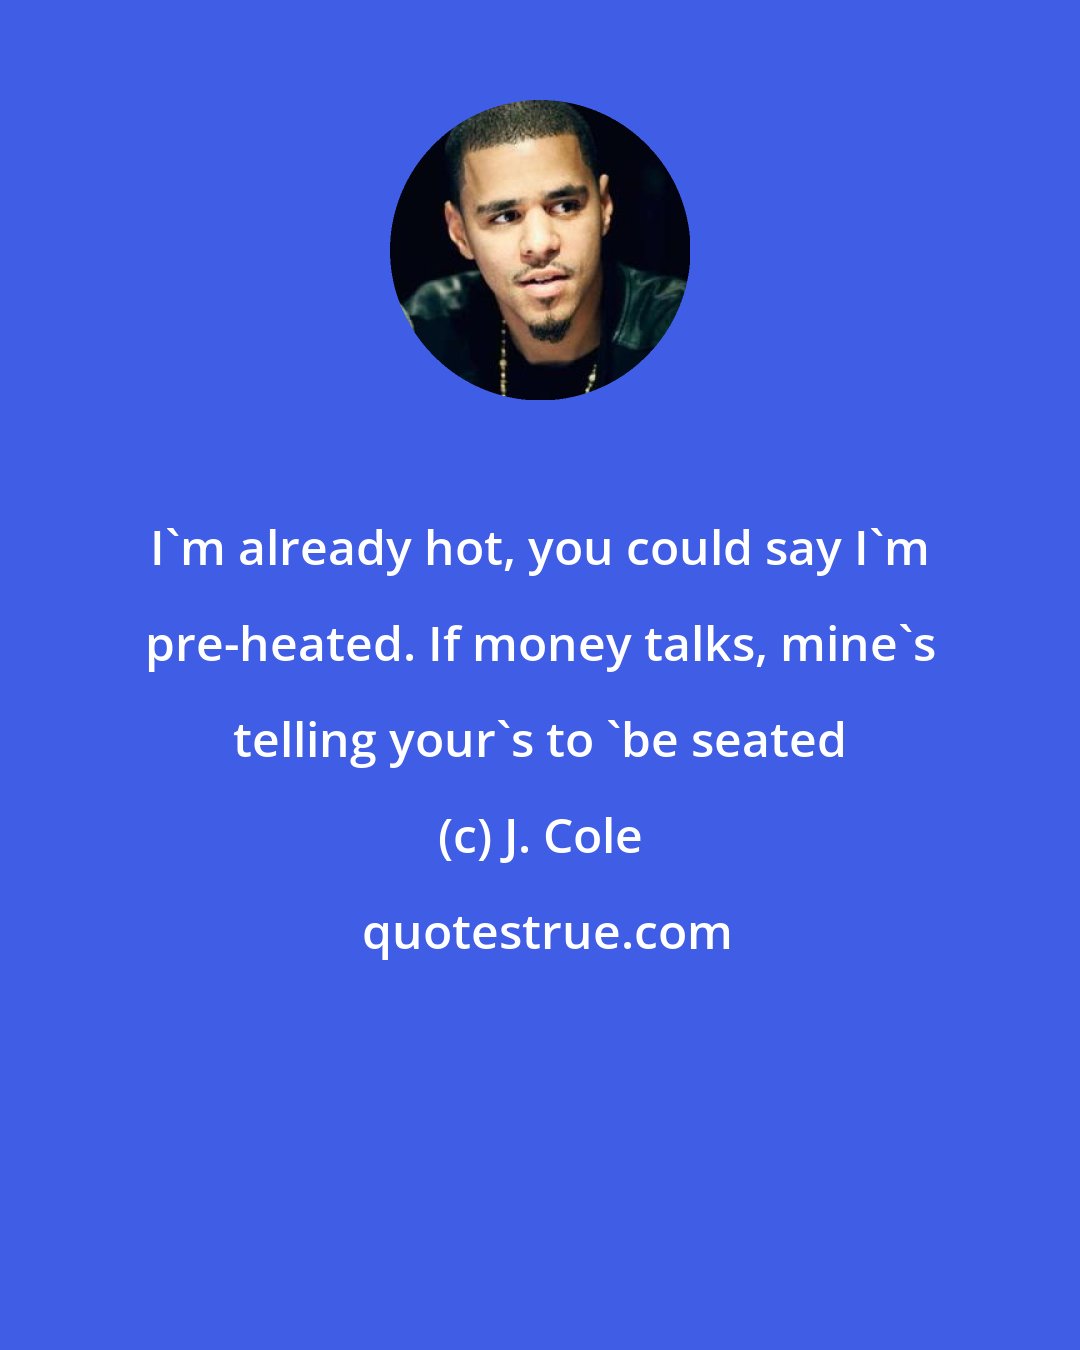 J. Cole: I'm already hot, you could say I'm pre-heated. If money talks, mine's telling your's to 'be seated